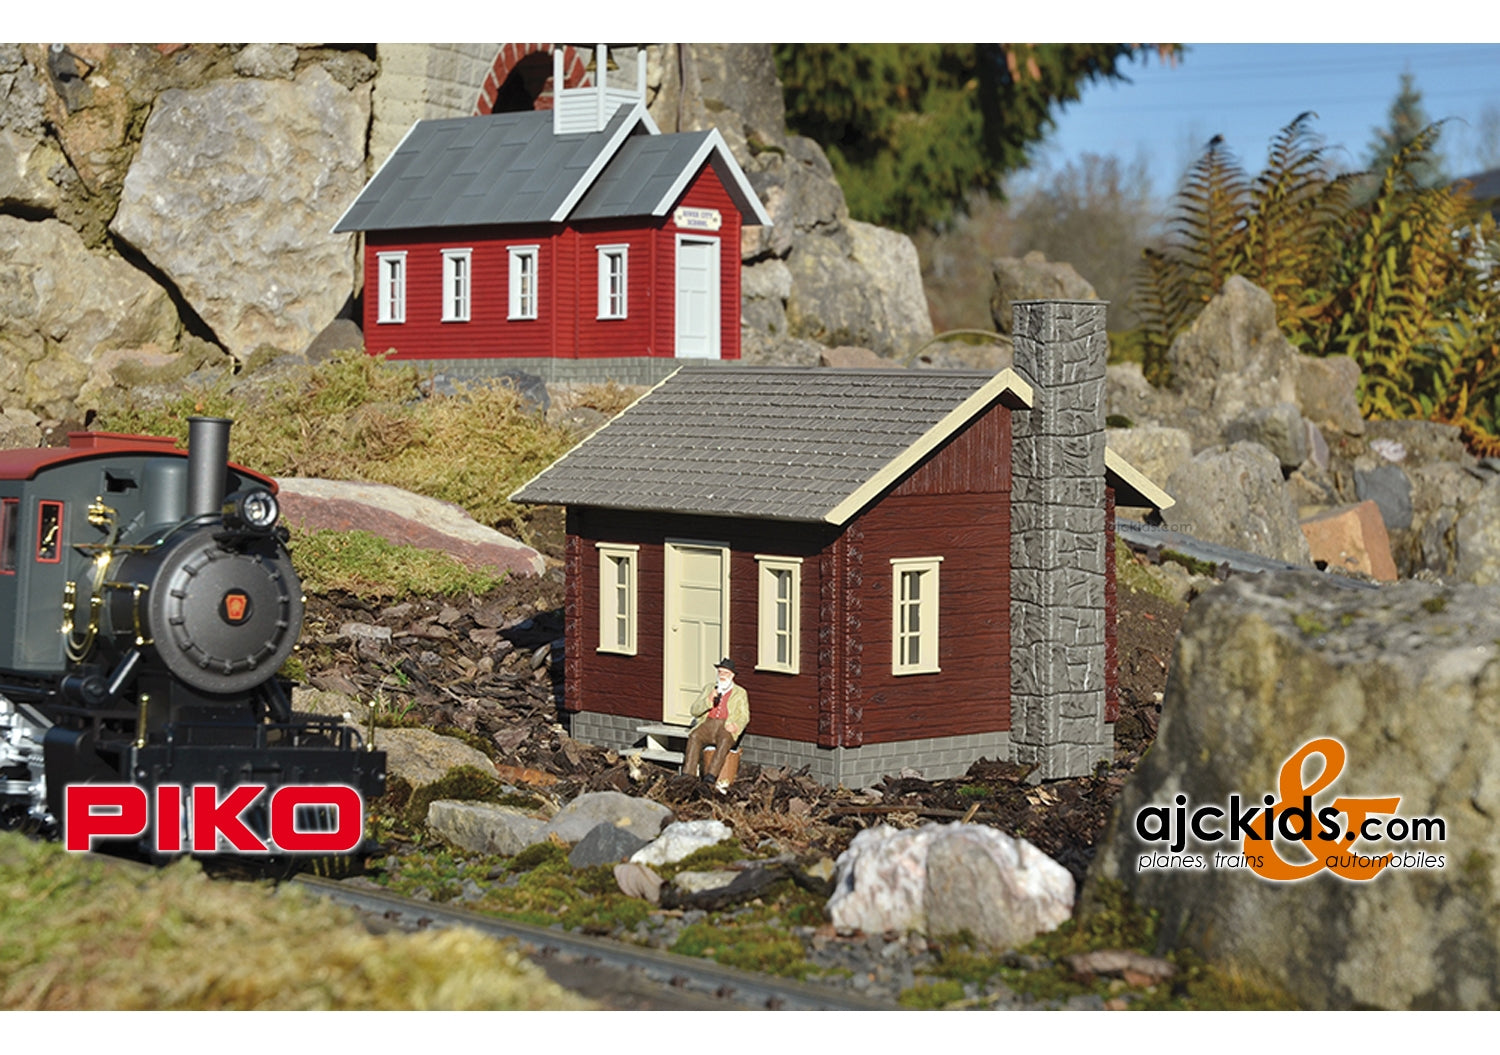 Piko 62716 - River City Tommy's Cabin Built-Up